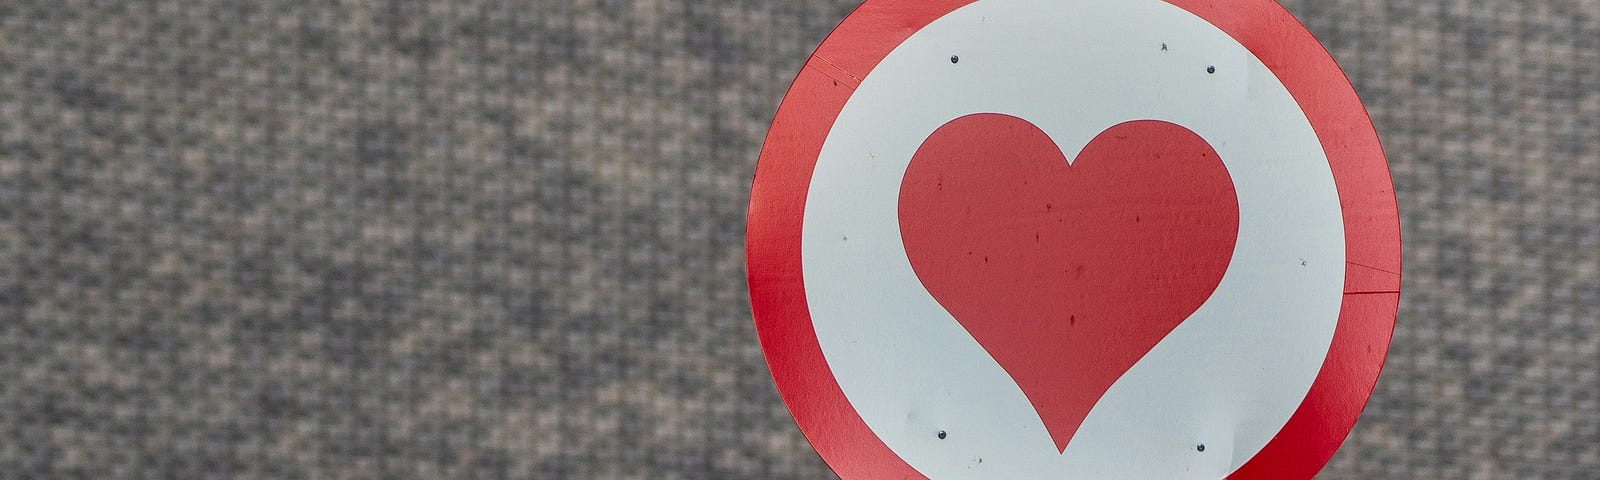 A traffic sign with a red heart in the center posted on a metal pole, with a grey textured background.